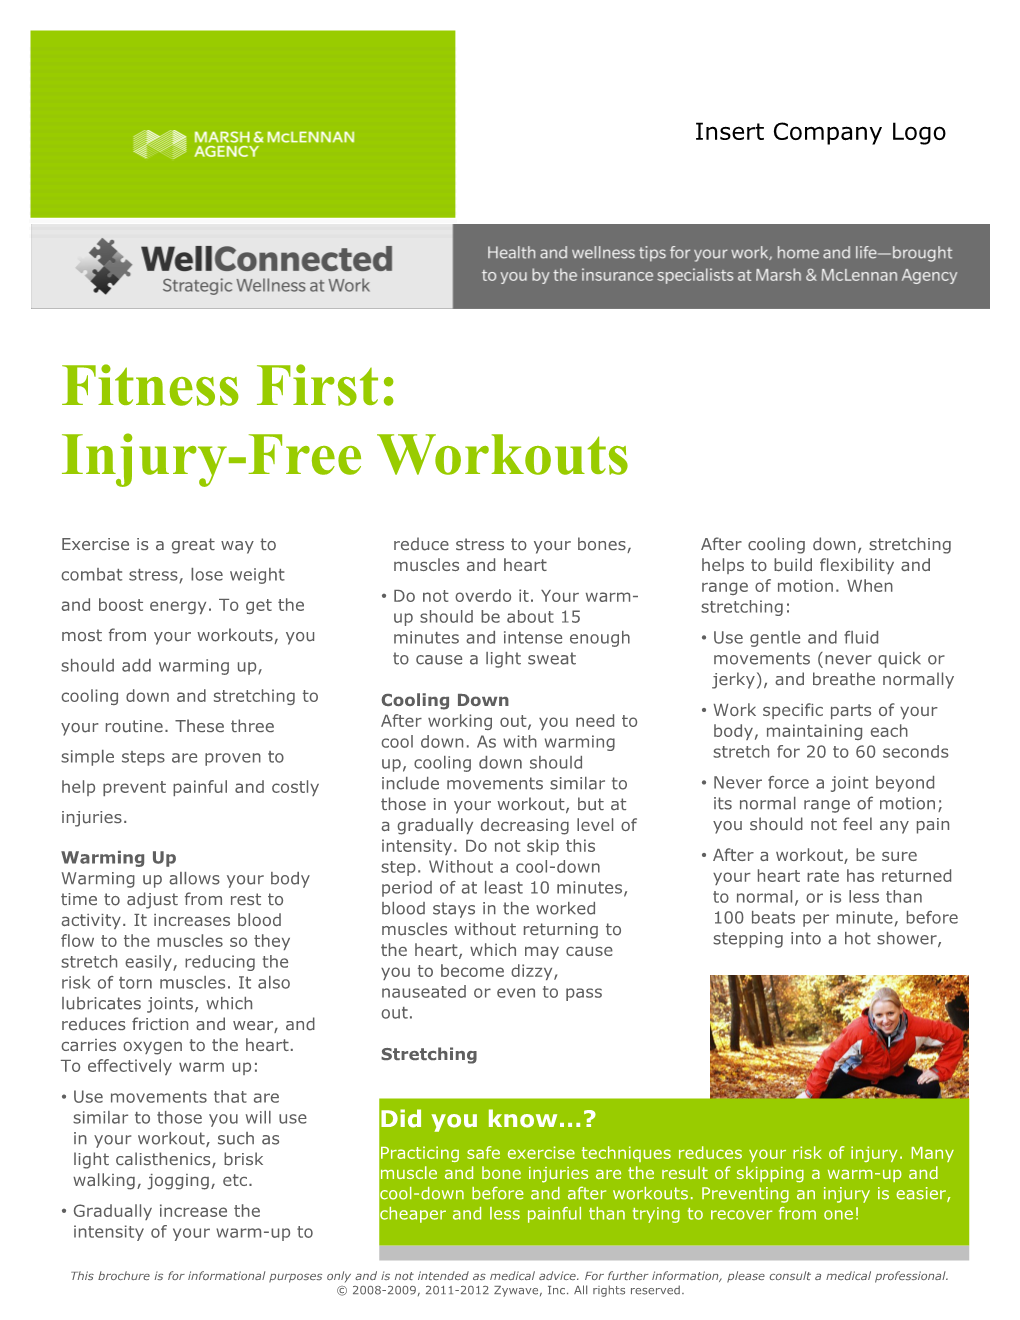 Fitness First: Warm-Up to Injury-Free Workouts